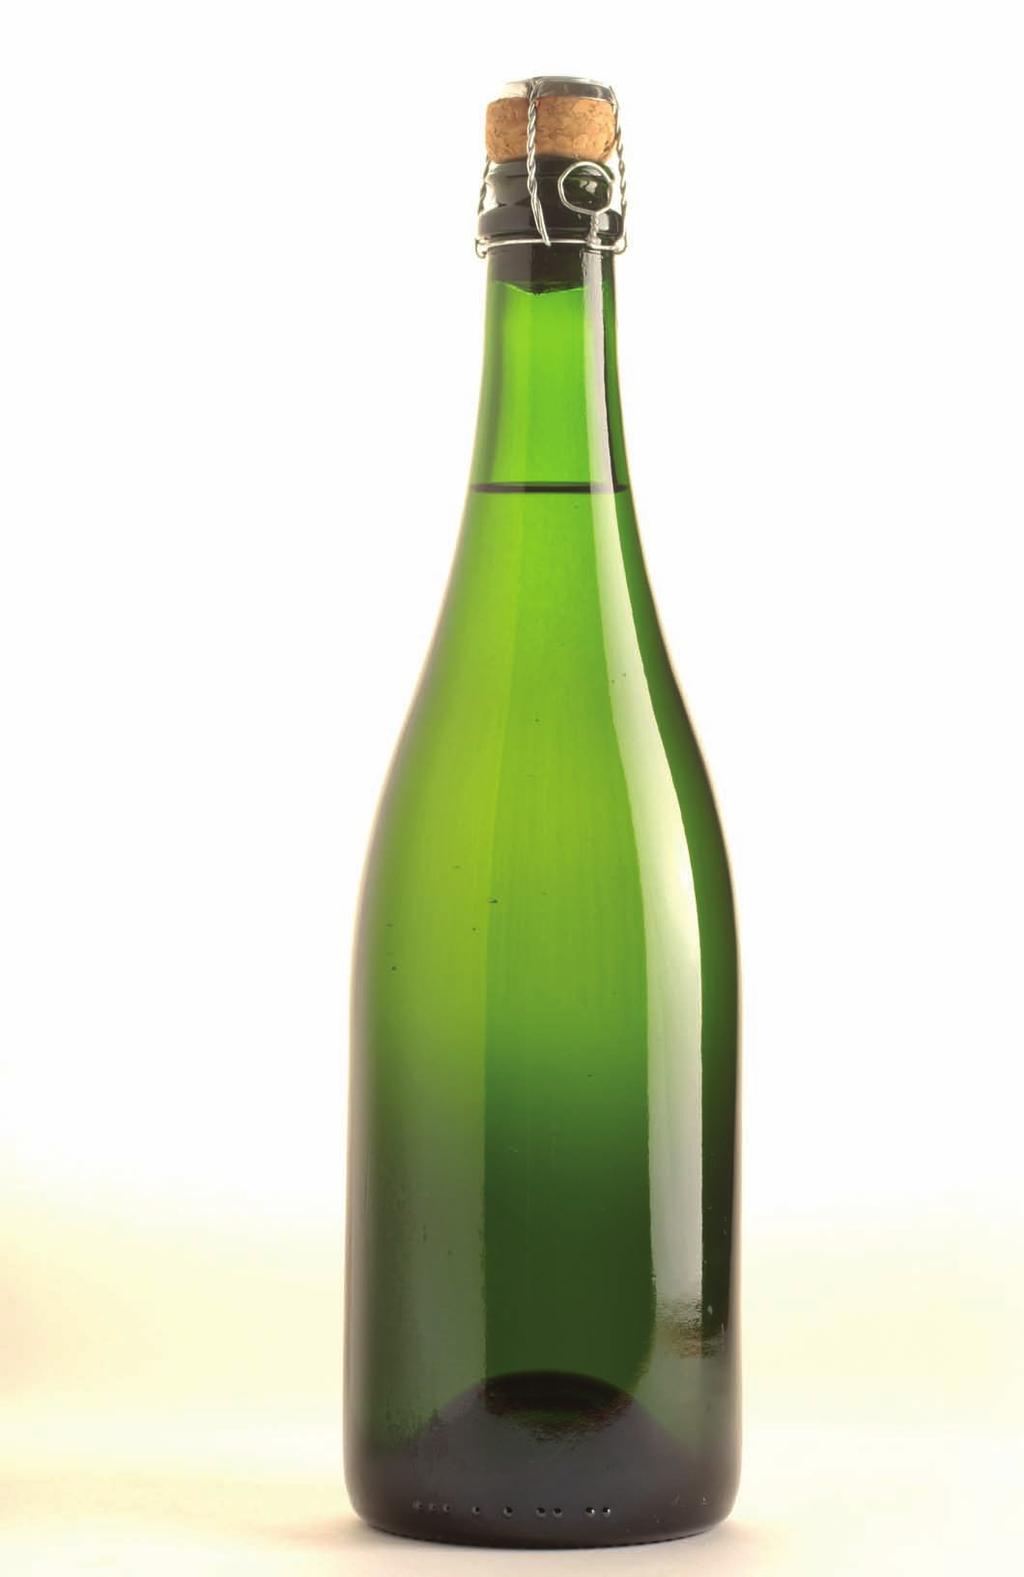 There have also been major achievements in lightweighting Champagne and sparkling wine bottles, which need to withstand significant internal pressure and often weigh between 800g and 900g.